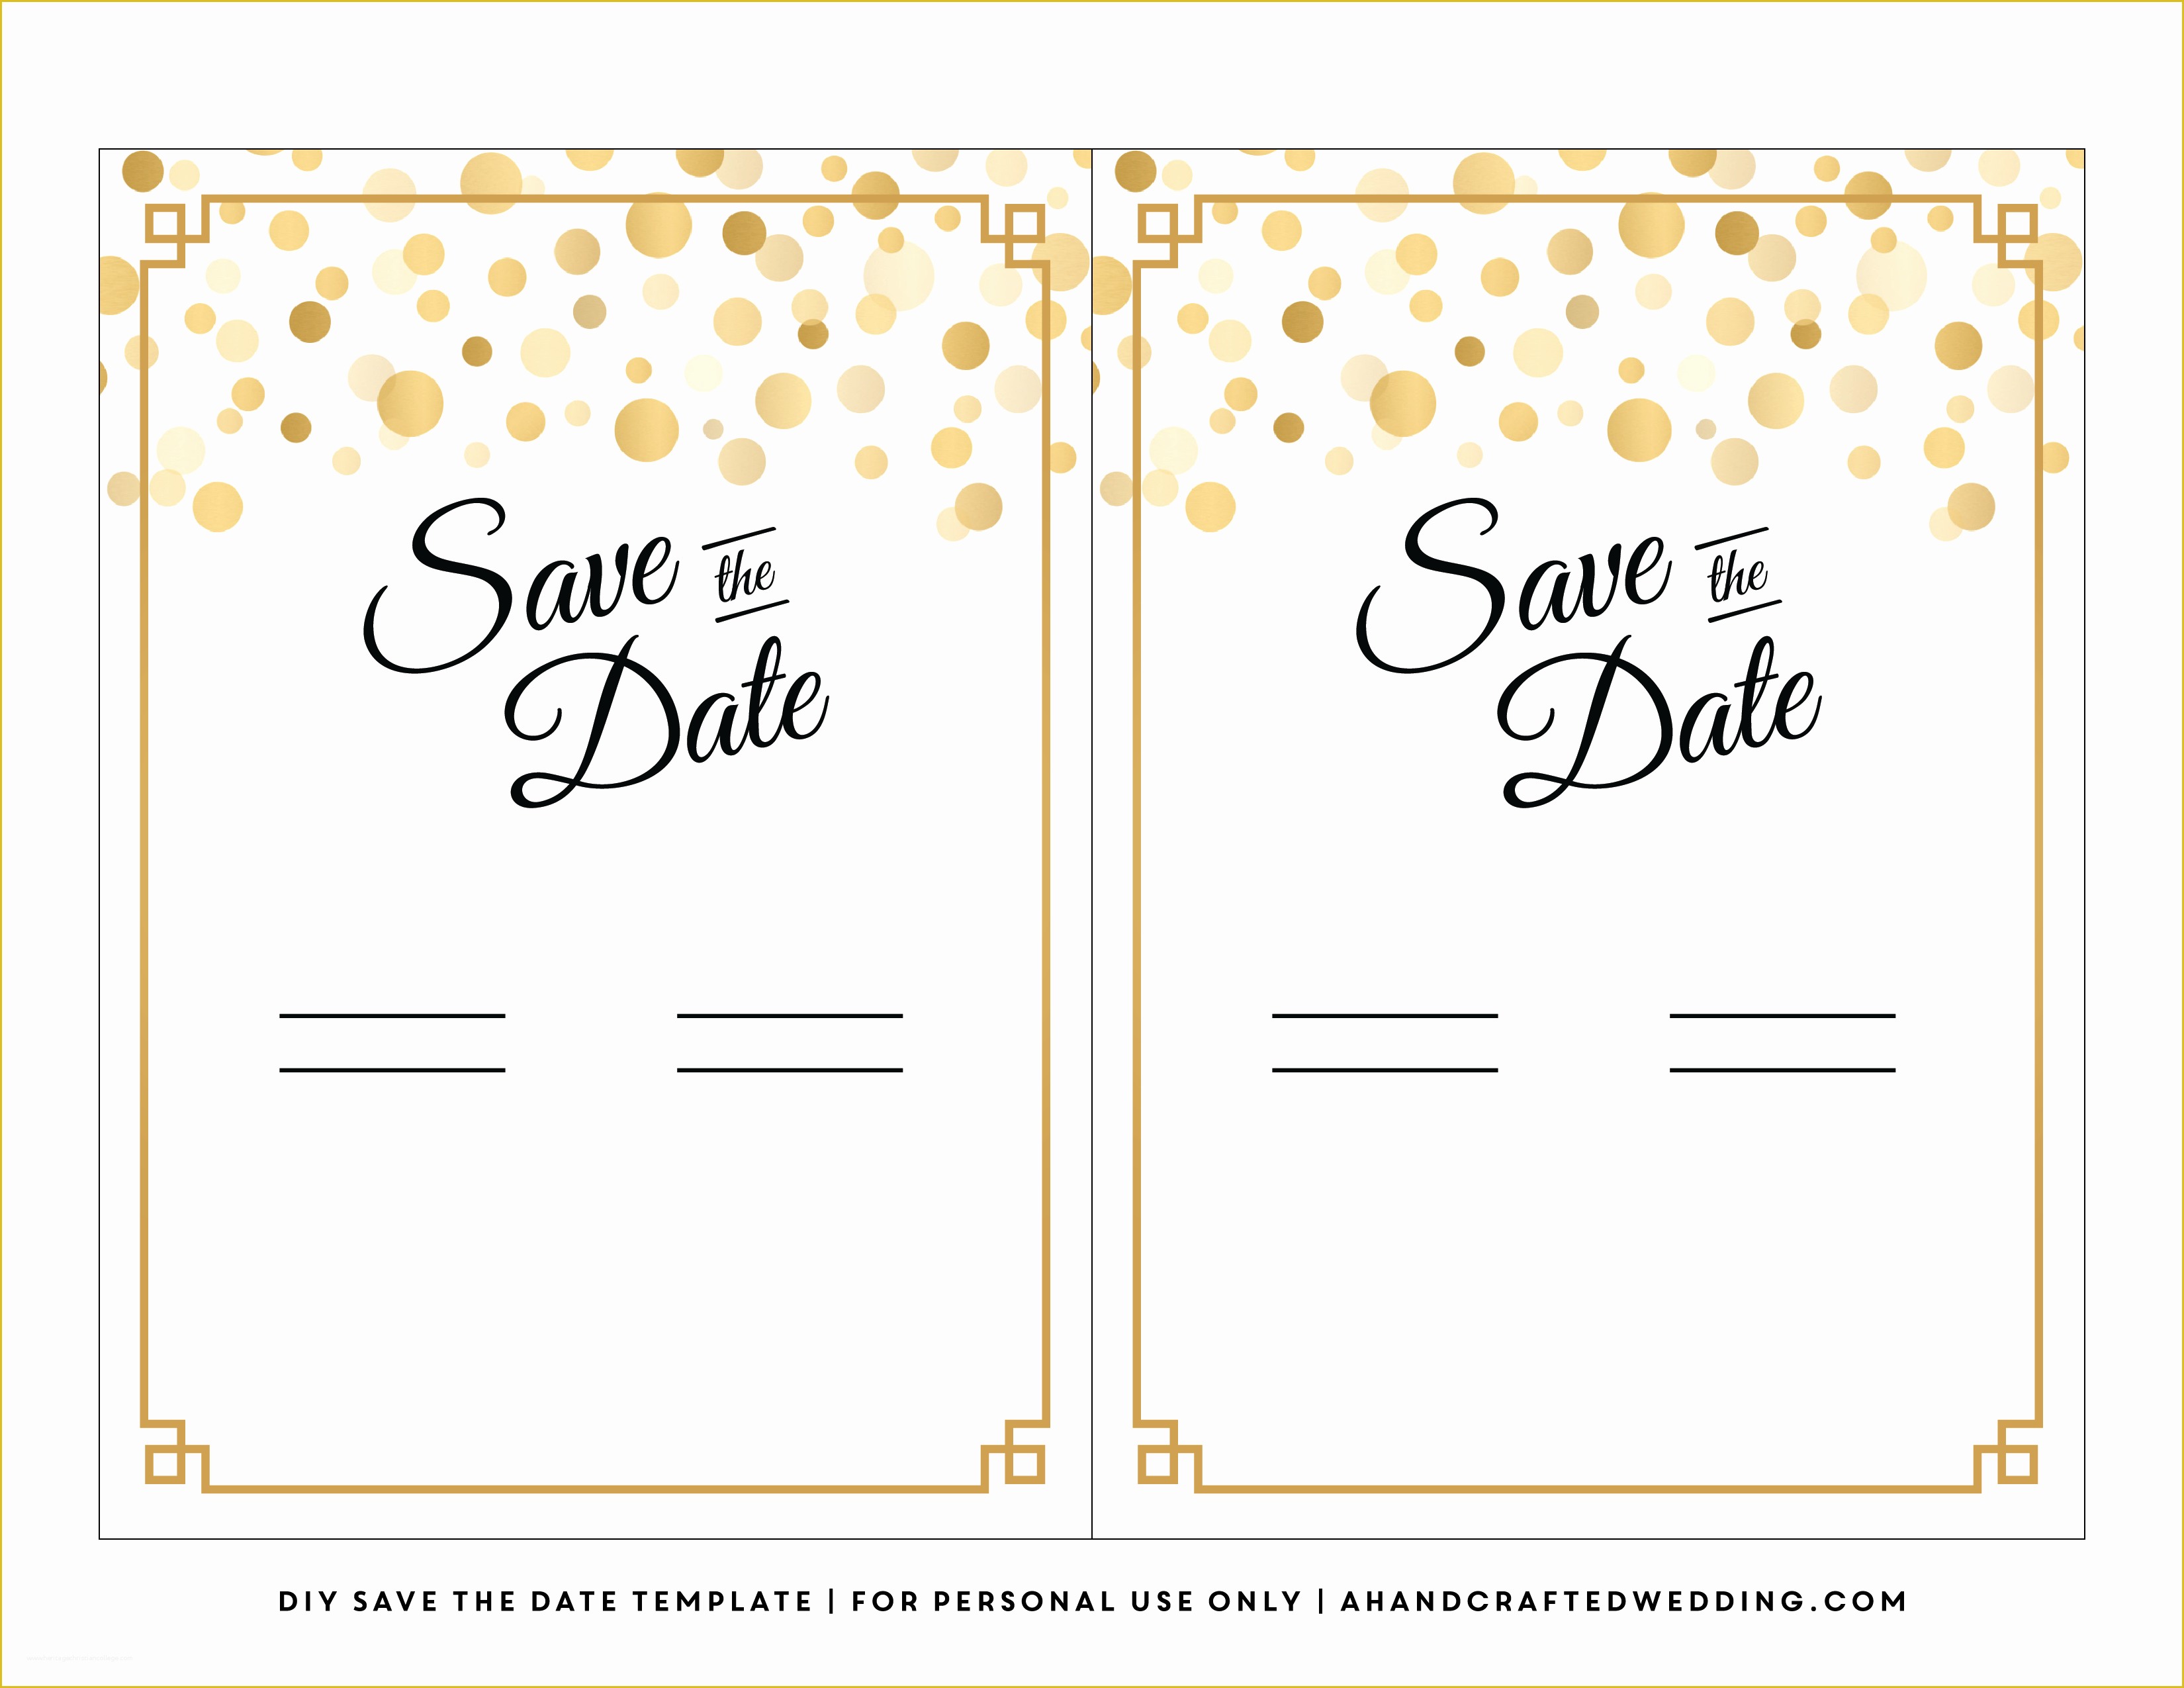 Save the Date Invitation Templates Free Of 7 Best Of Diy Save the Date Template Halloween